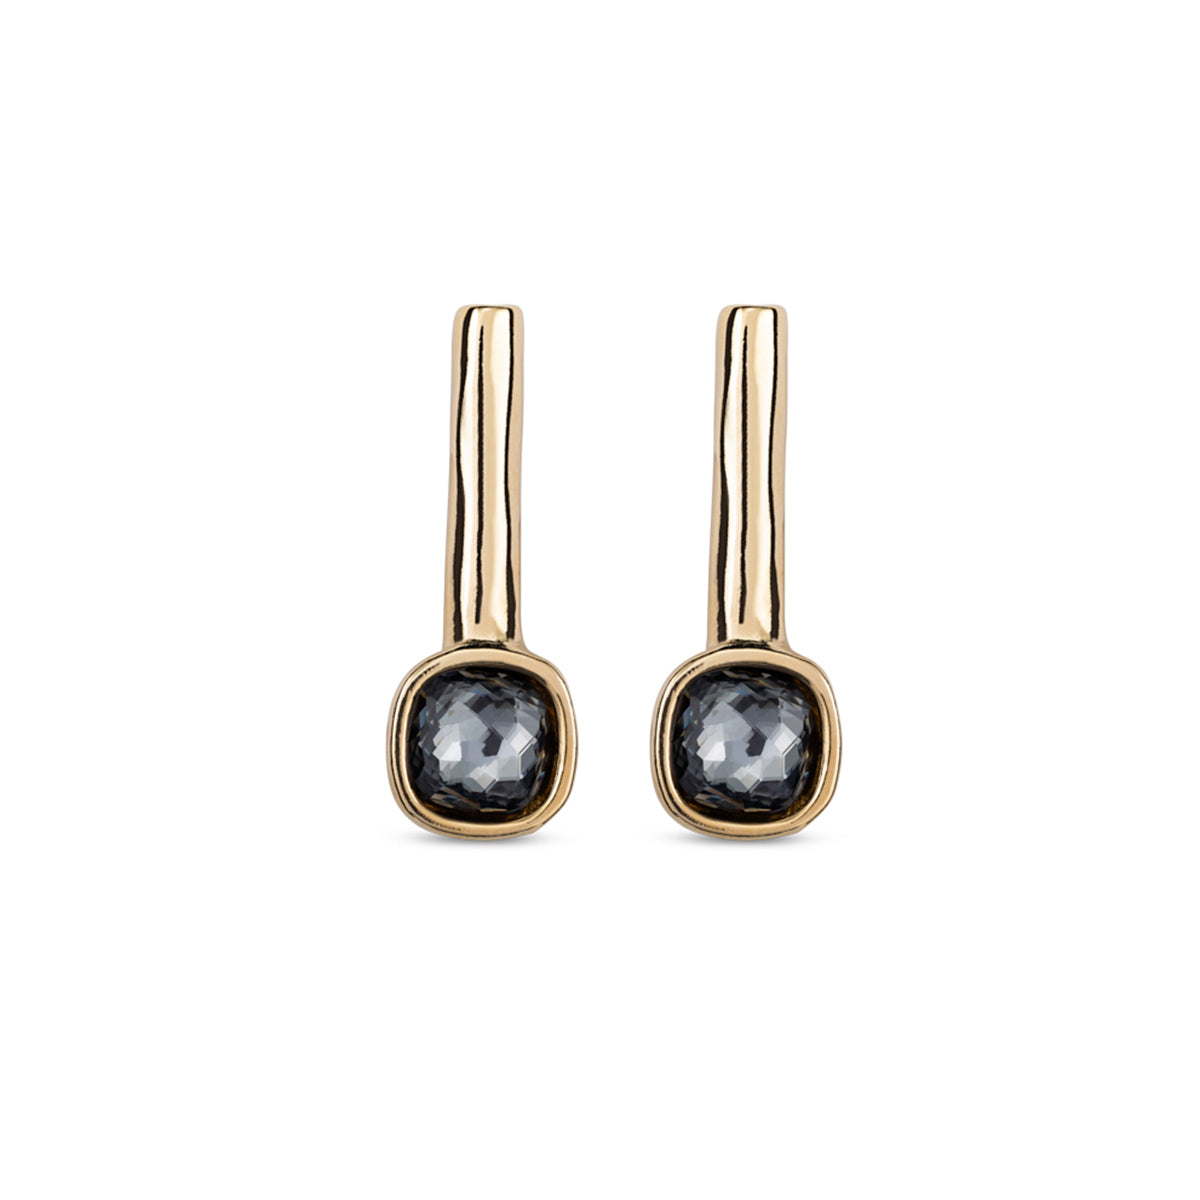 Ladies Earrings. Gold-Plated Metal Alloy Earrings With Tubule And Grey Crystals.